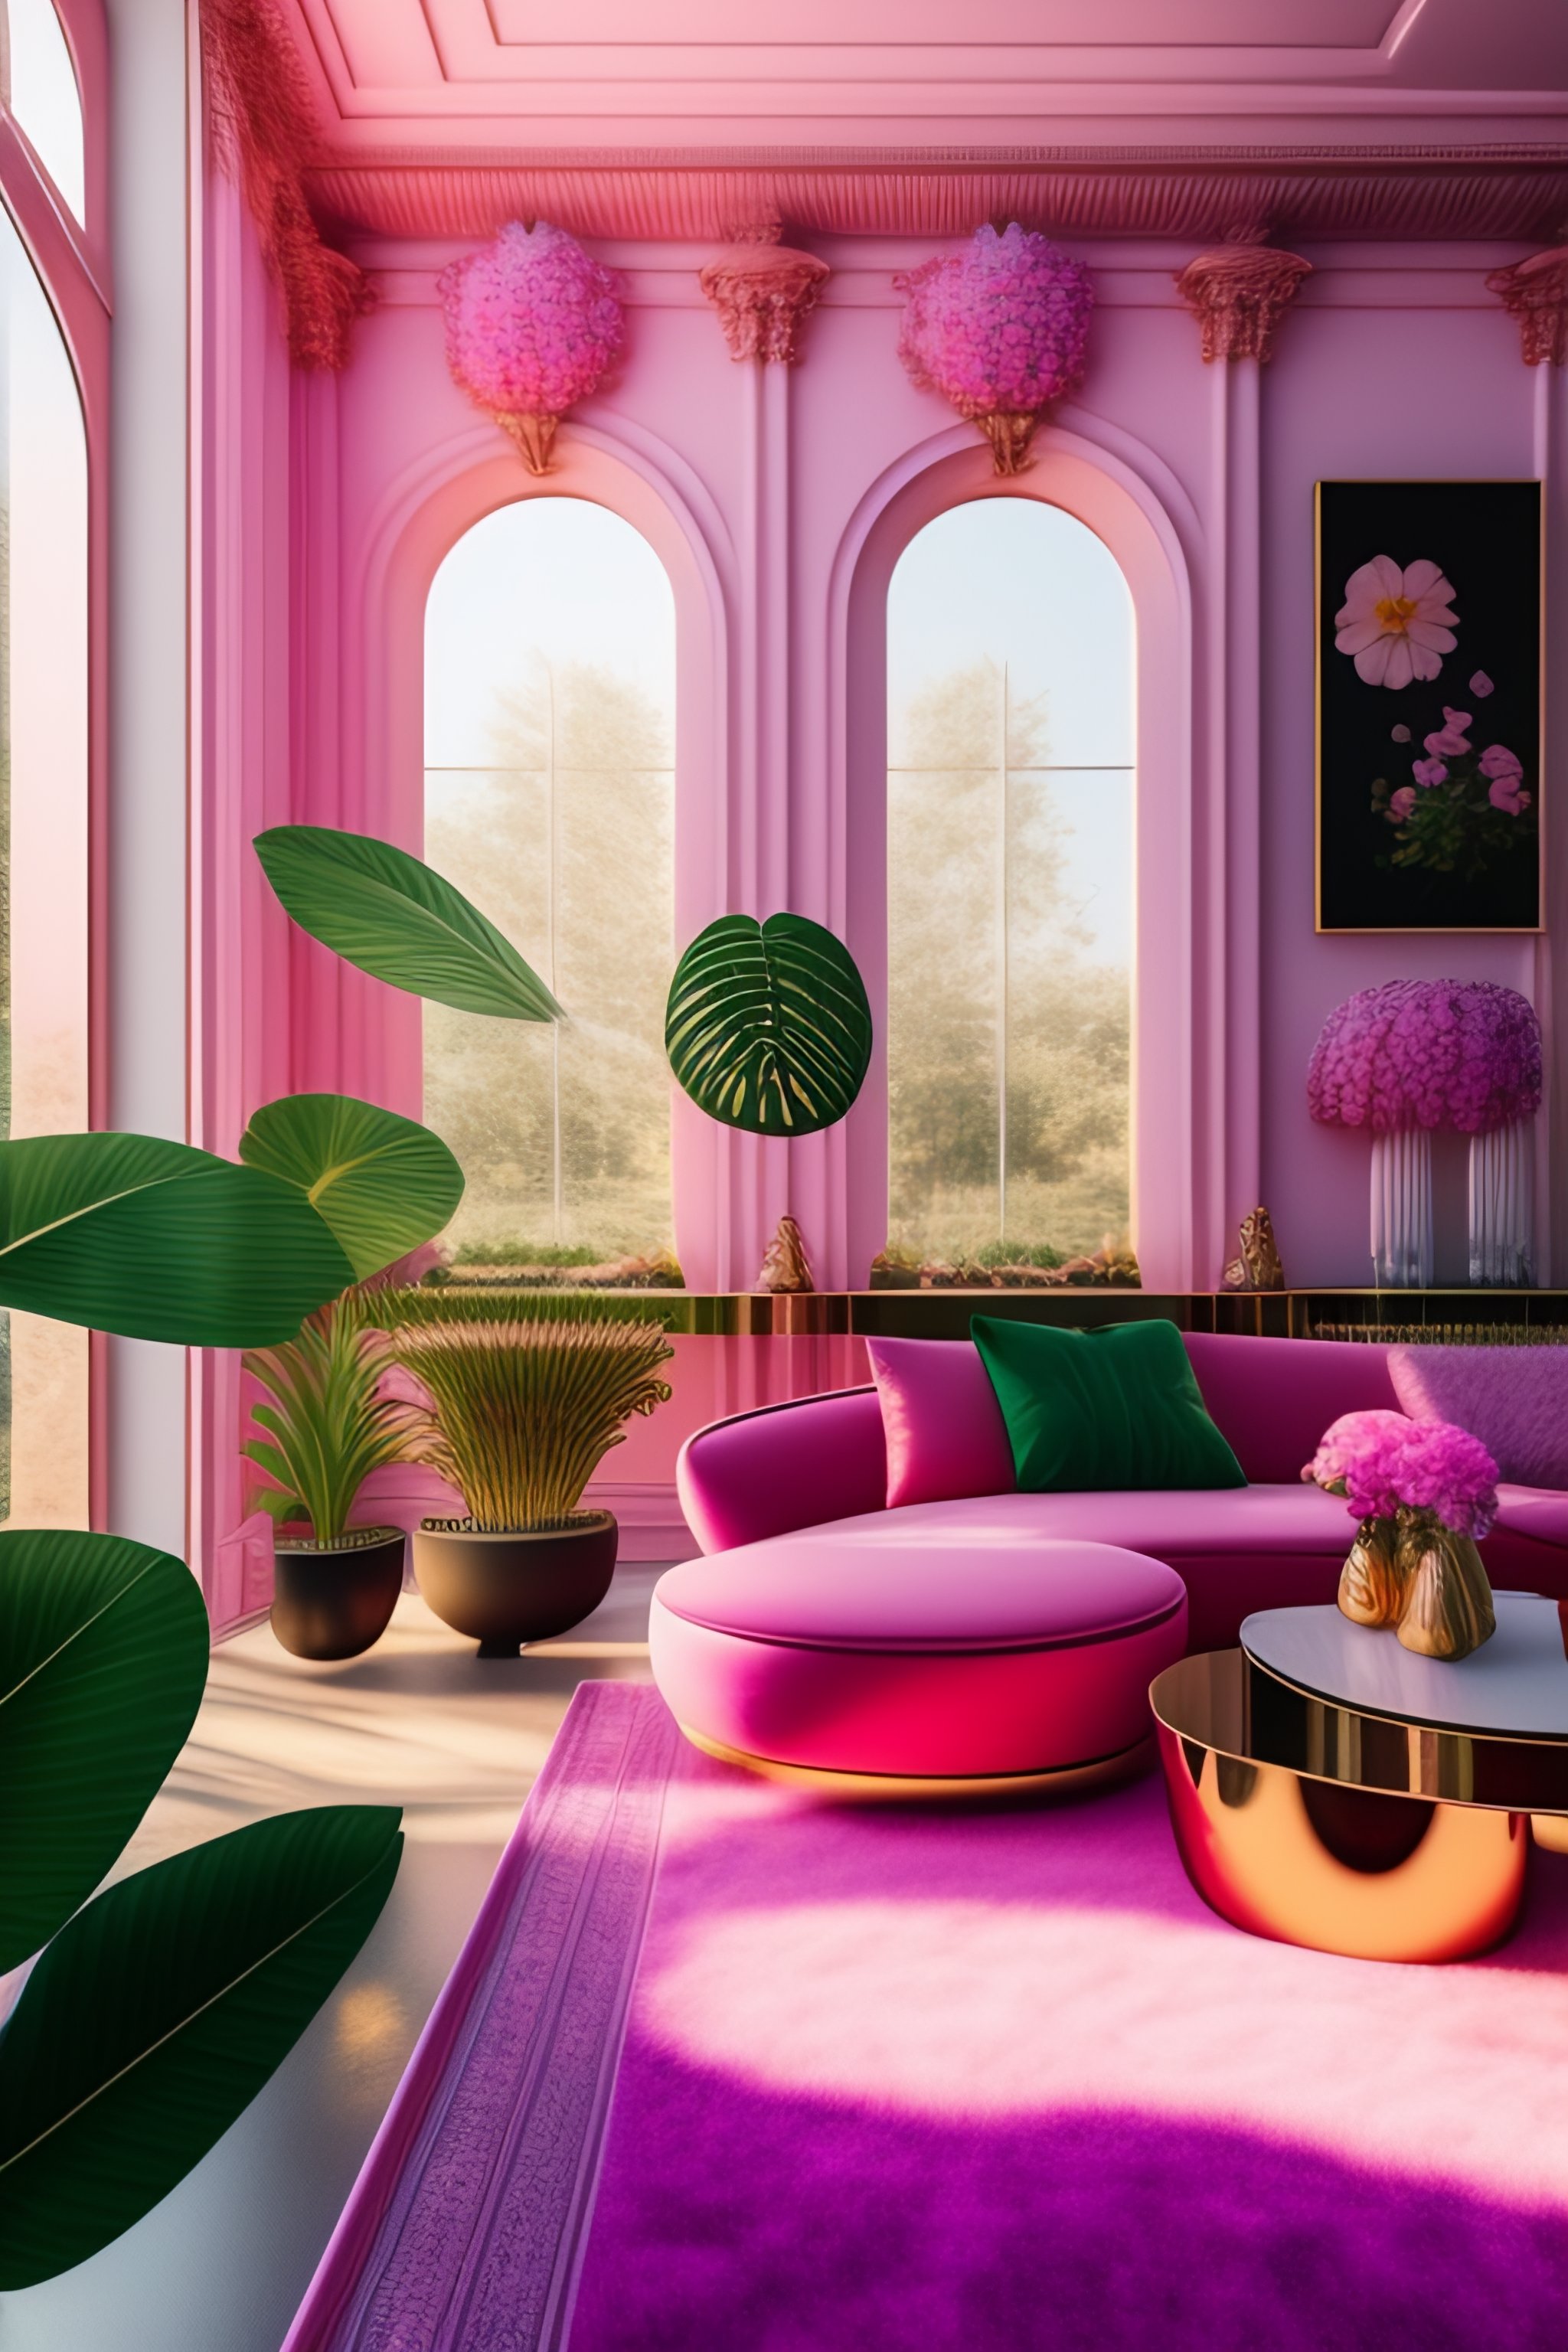 Lexica - Architectural photo of a maximalist pink solar greenhouse ...